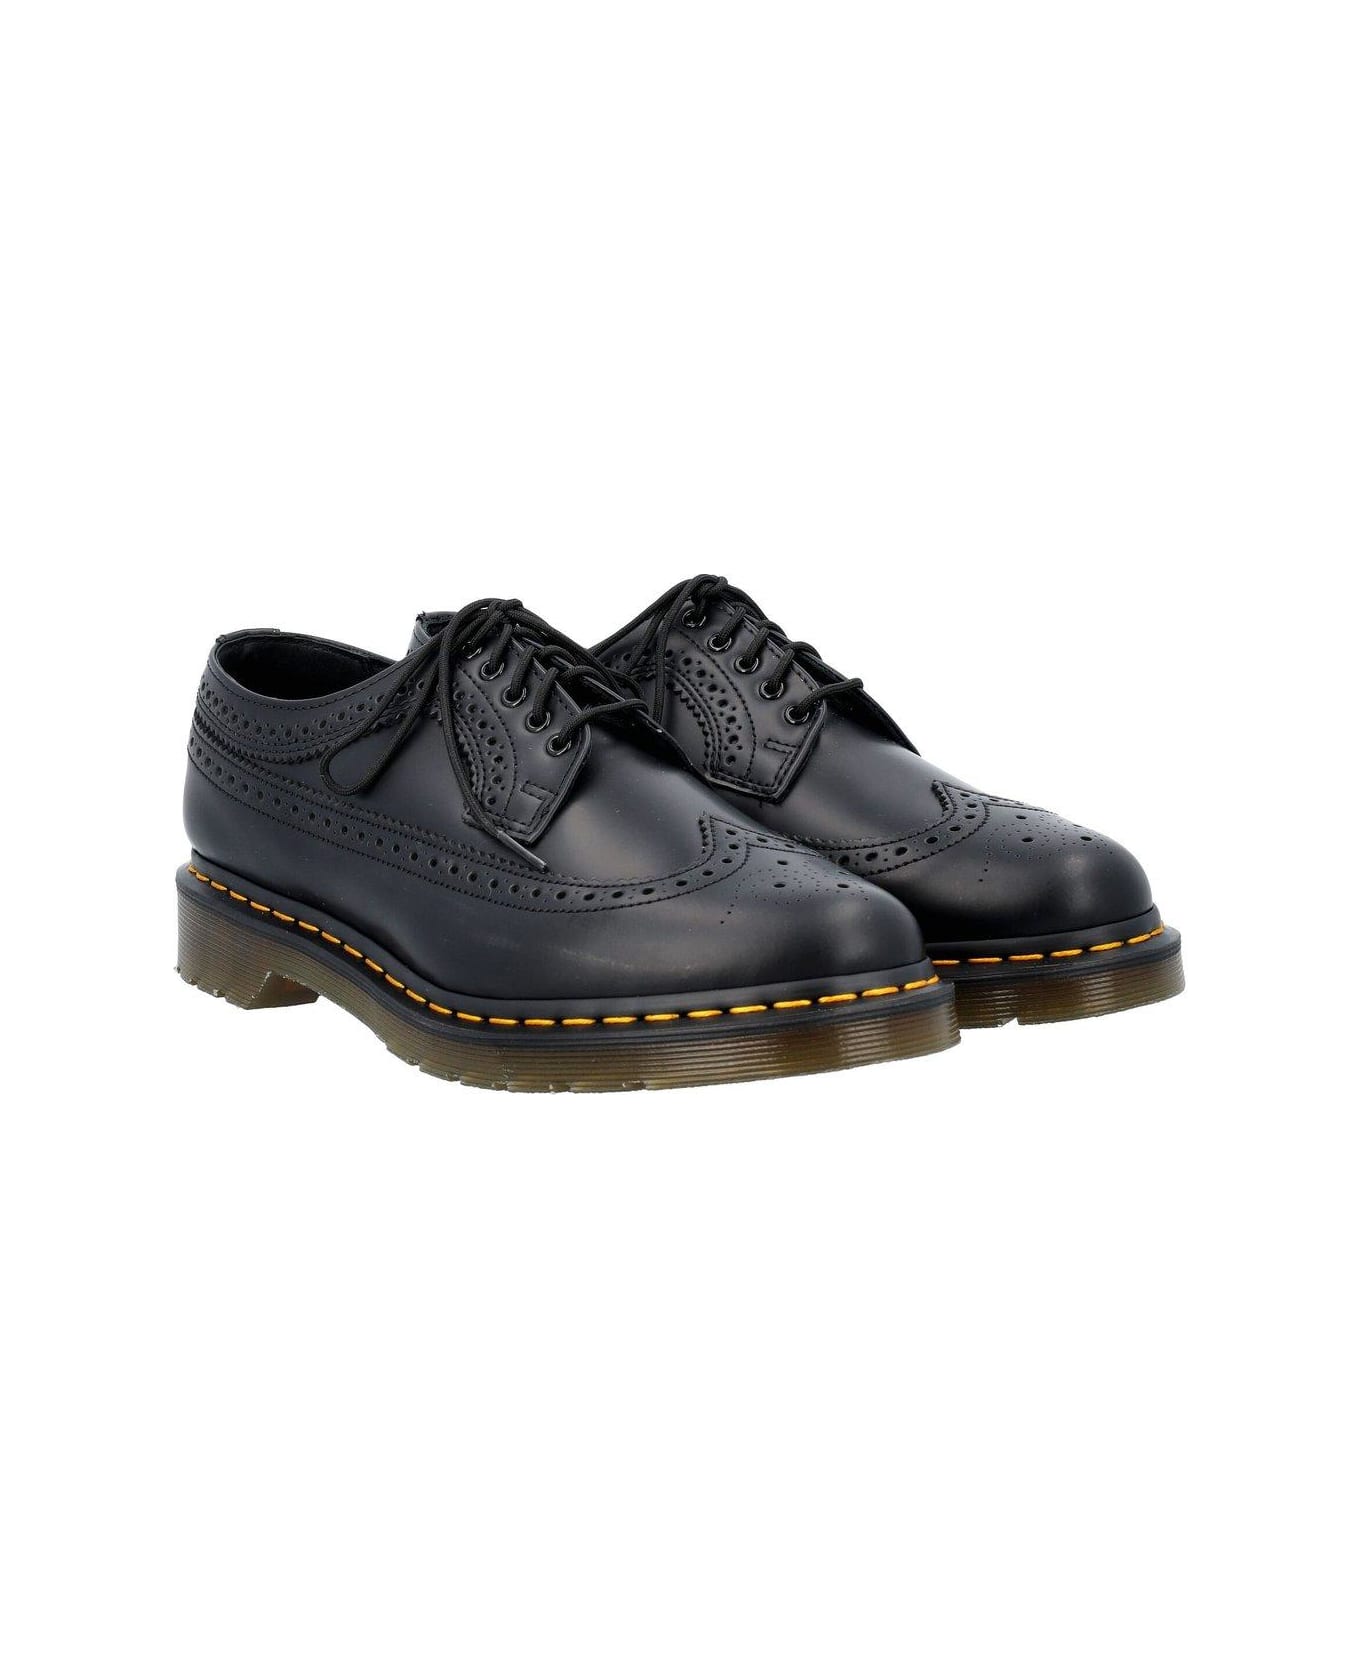 Dr. Martens 3989 Lace-up Brogue Shoes - black ローファー＆デッキシューズ